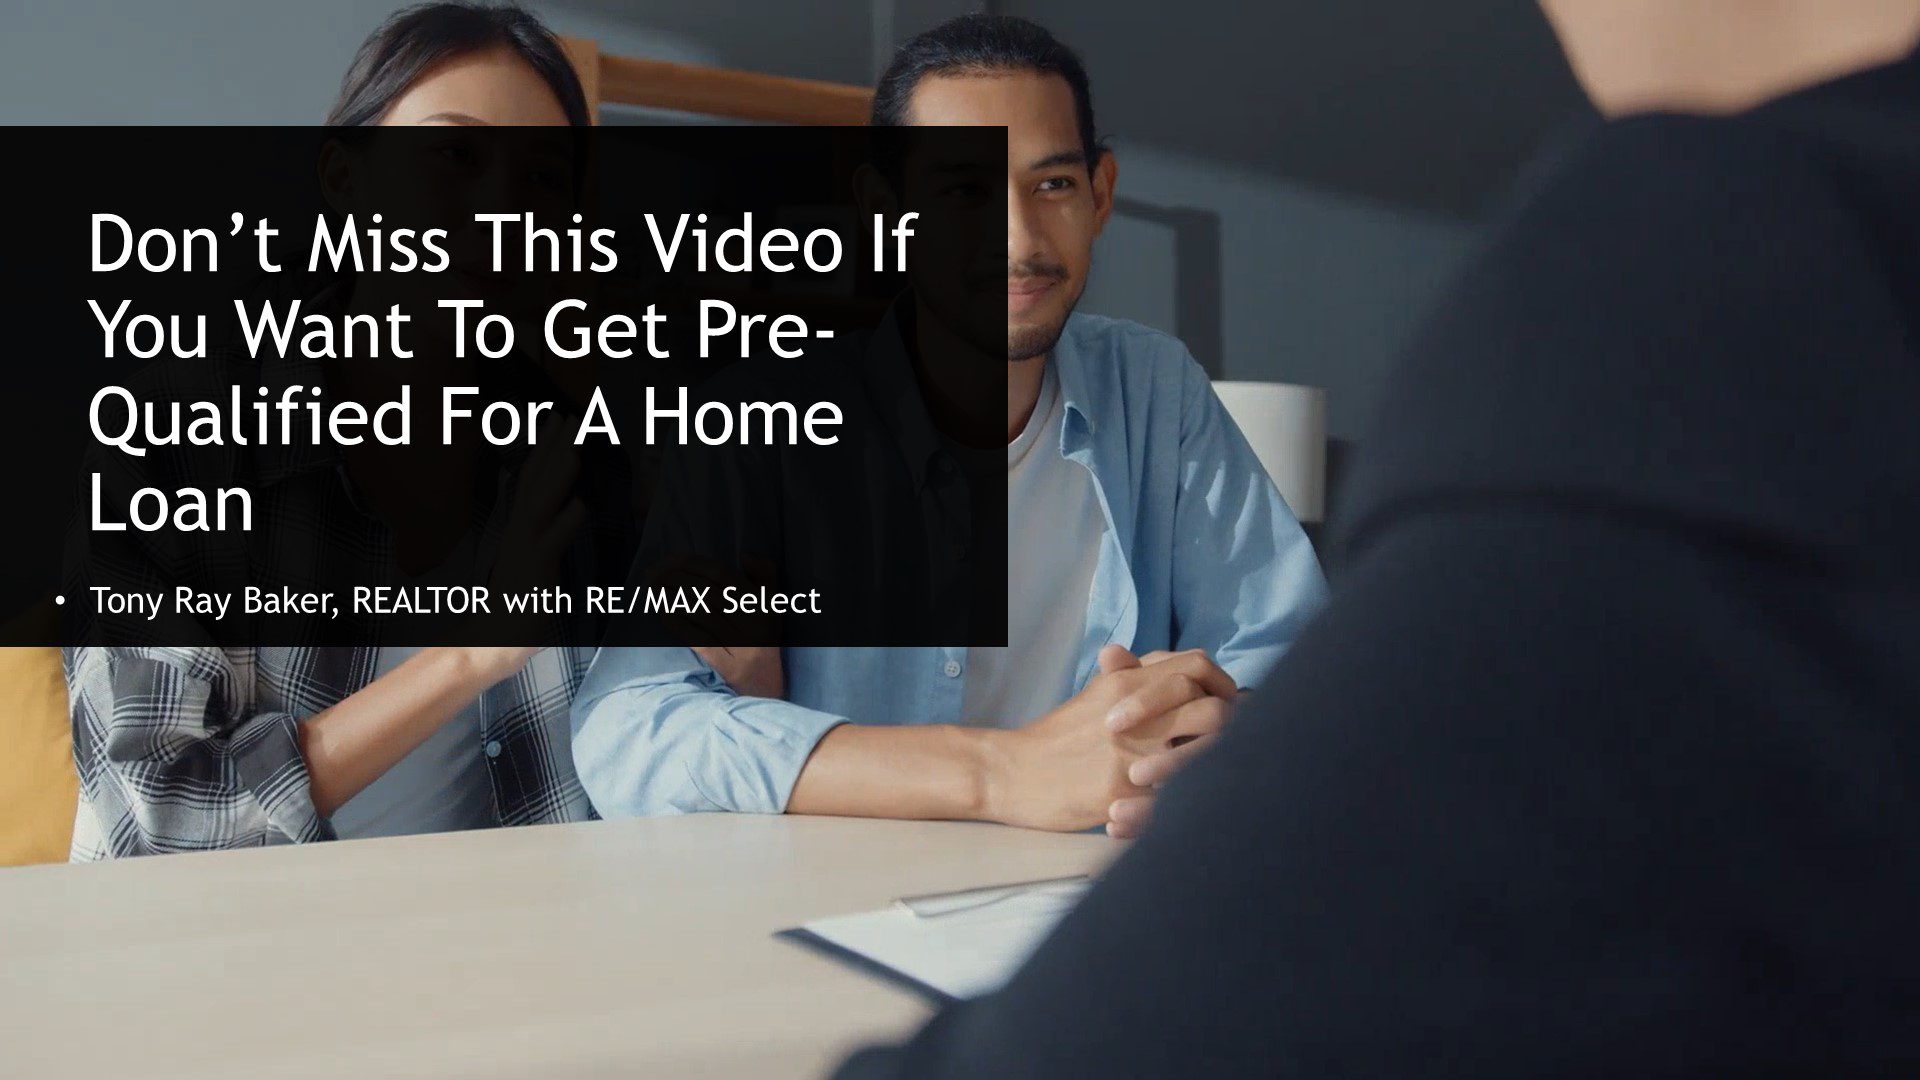 Don't Miss This Video If You Want To Get Pre Qualified For A Home Loan